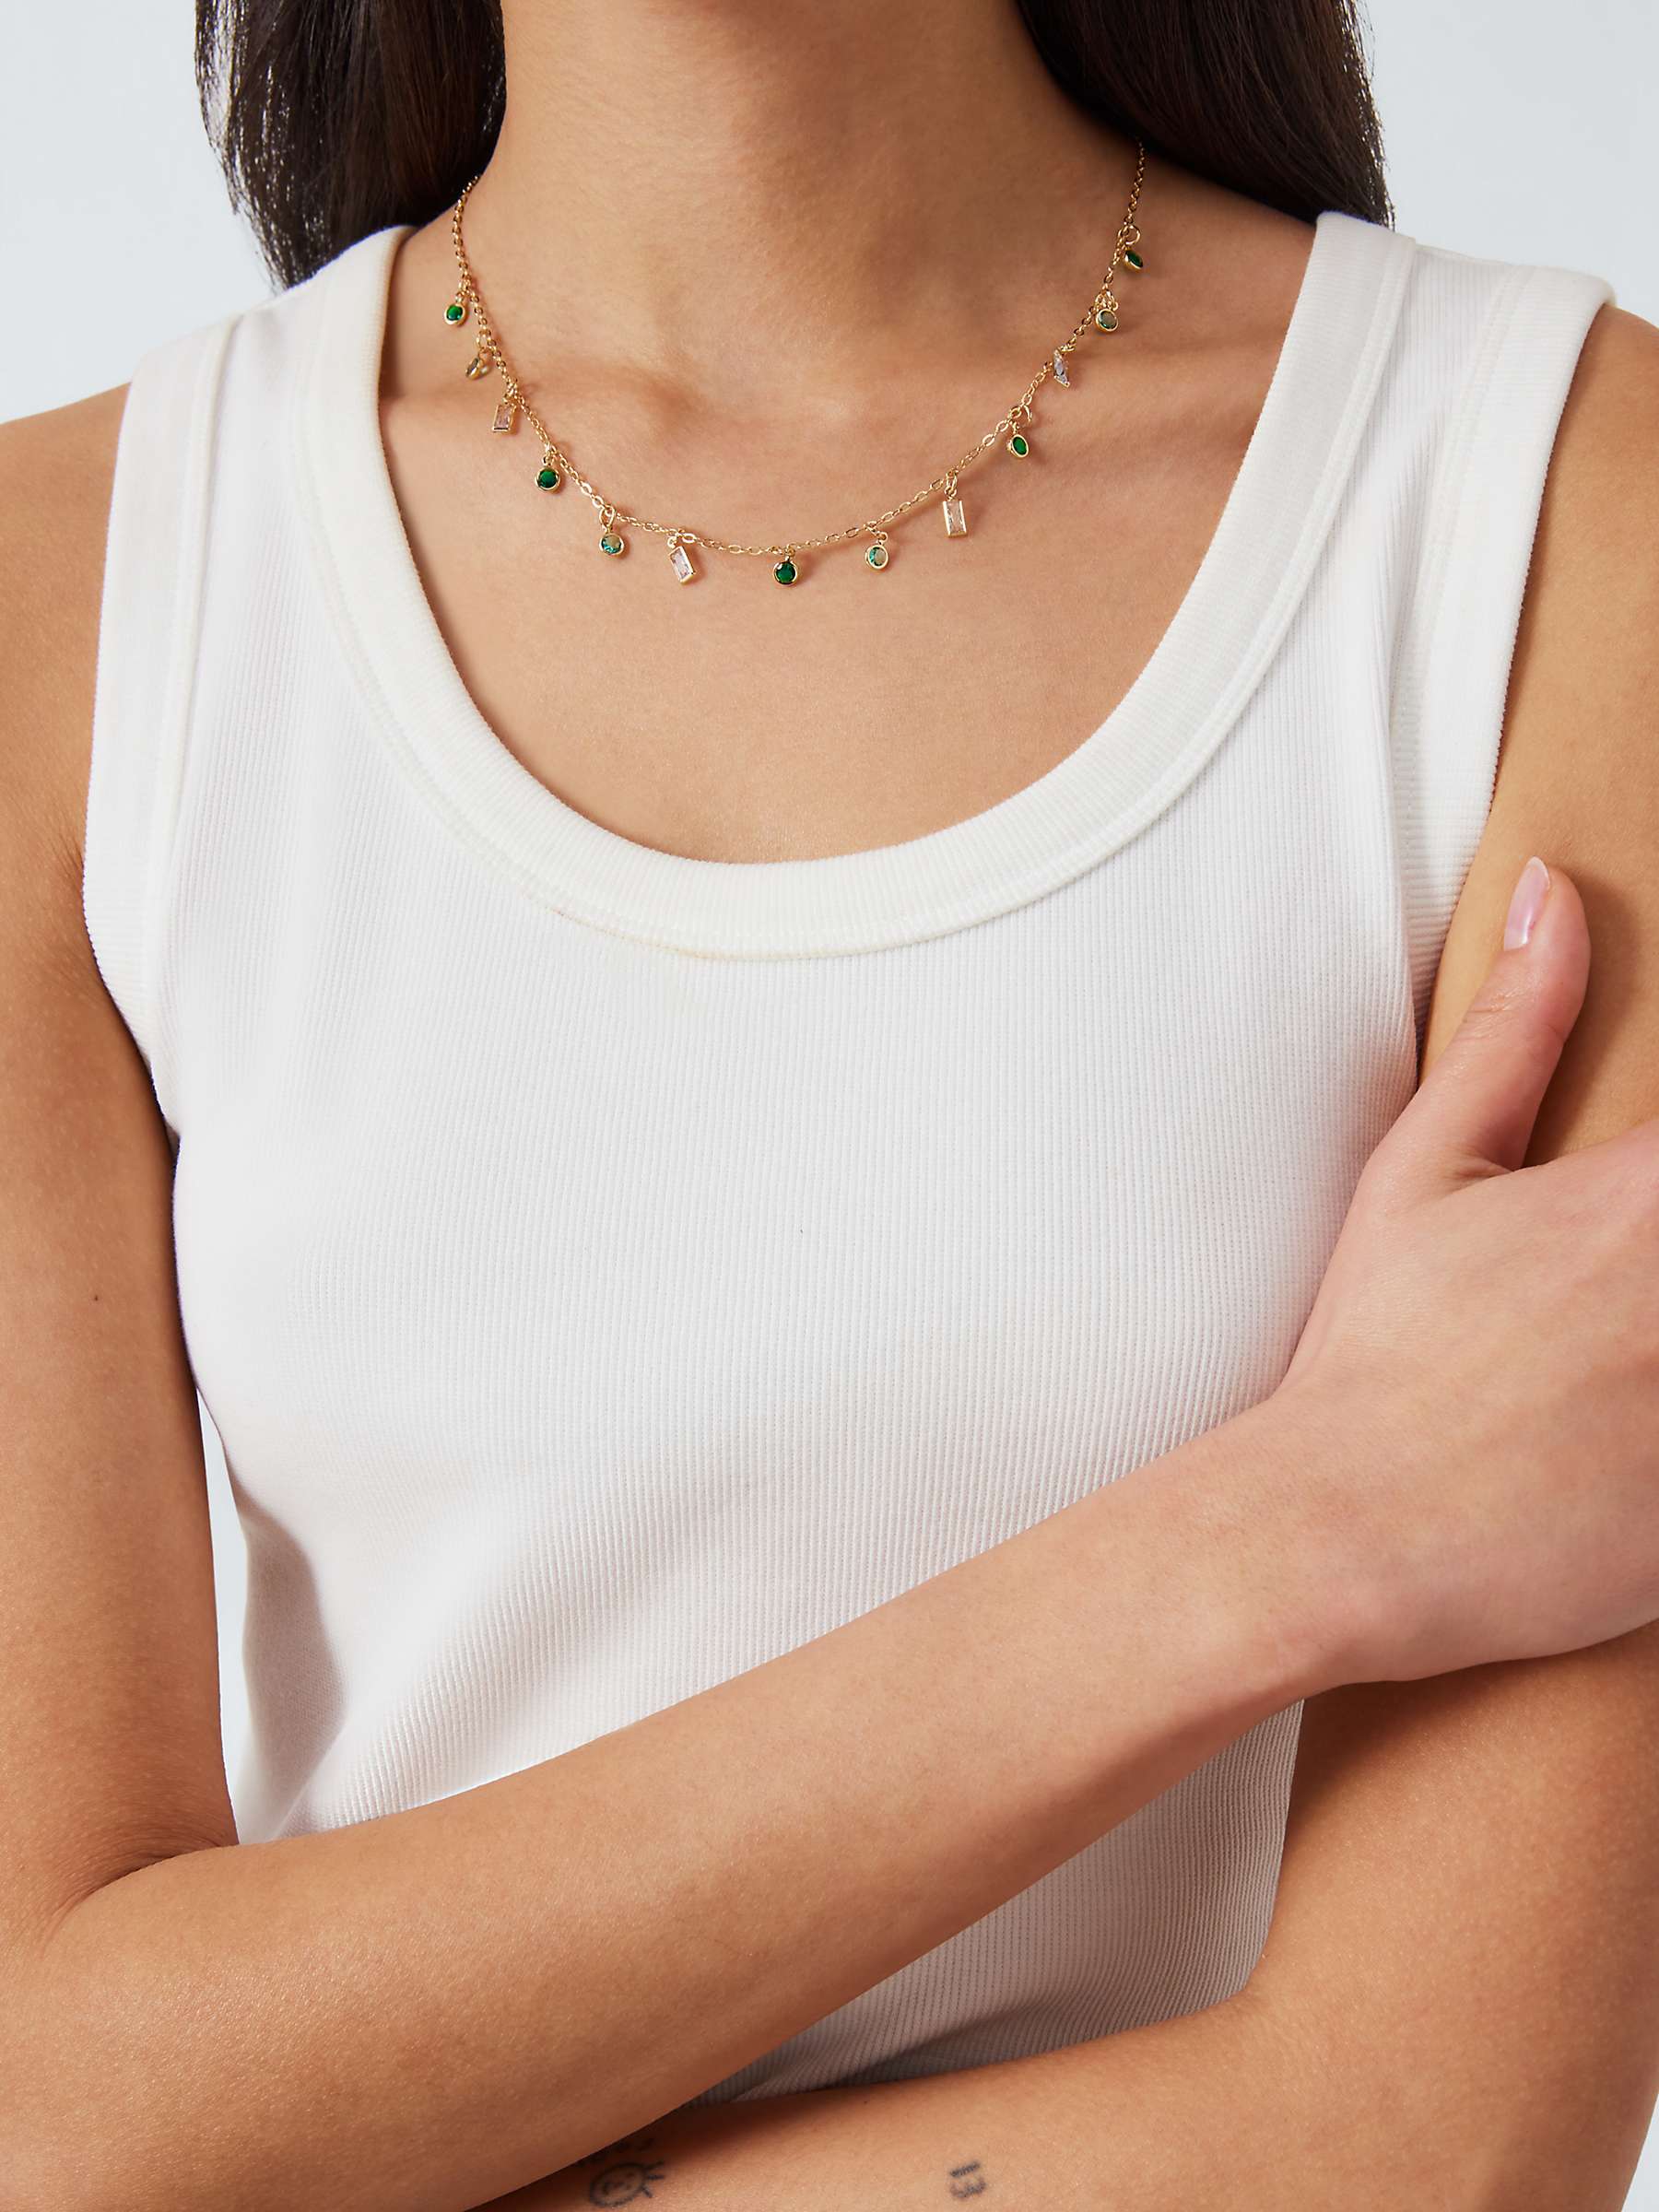 Buy John Lewis Droplet Crystal Chain Necklace, Gold/Green Online at johnlewis.com